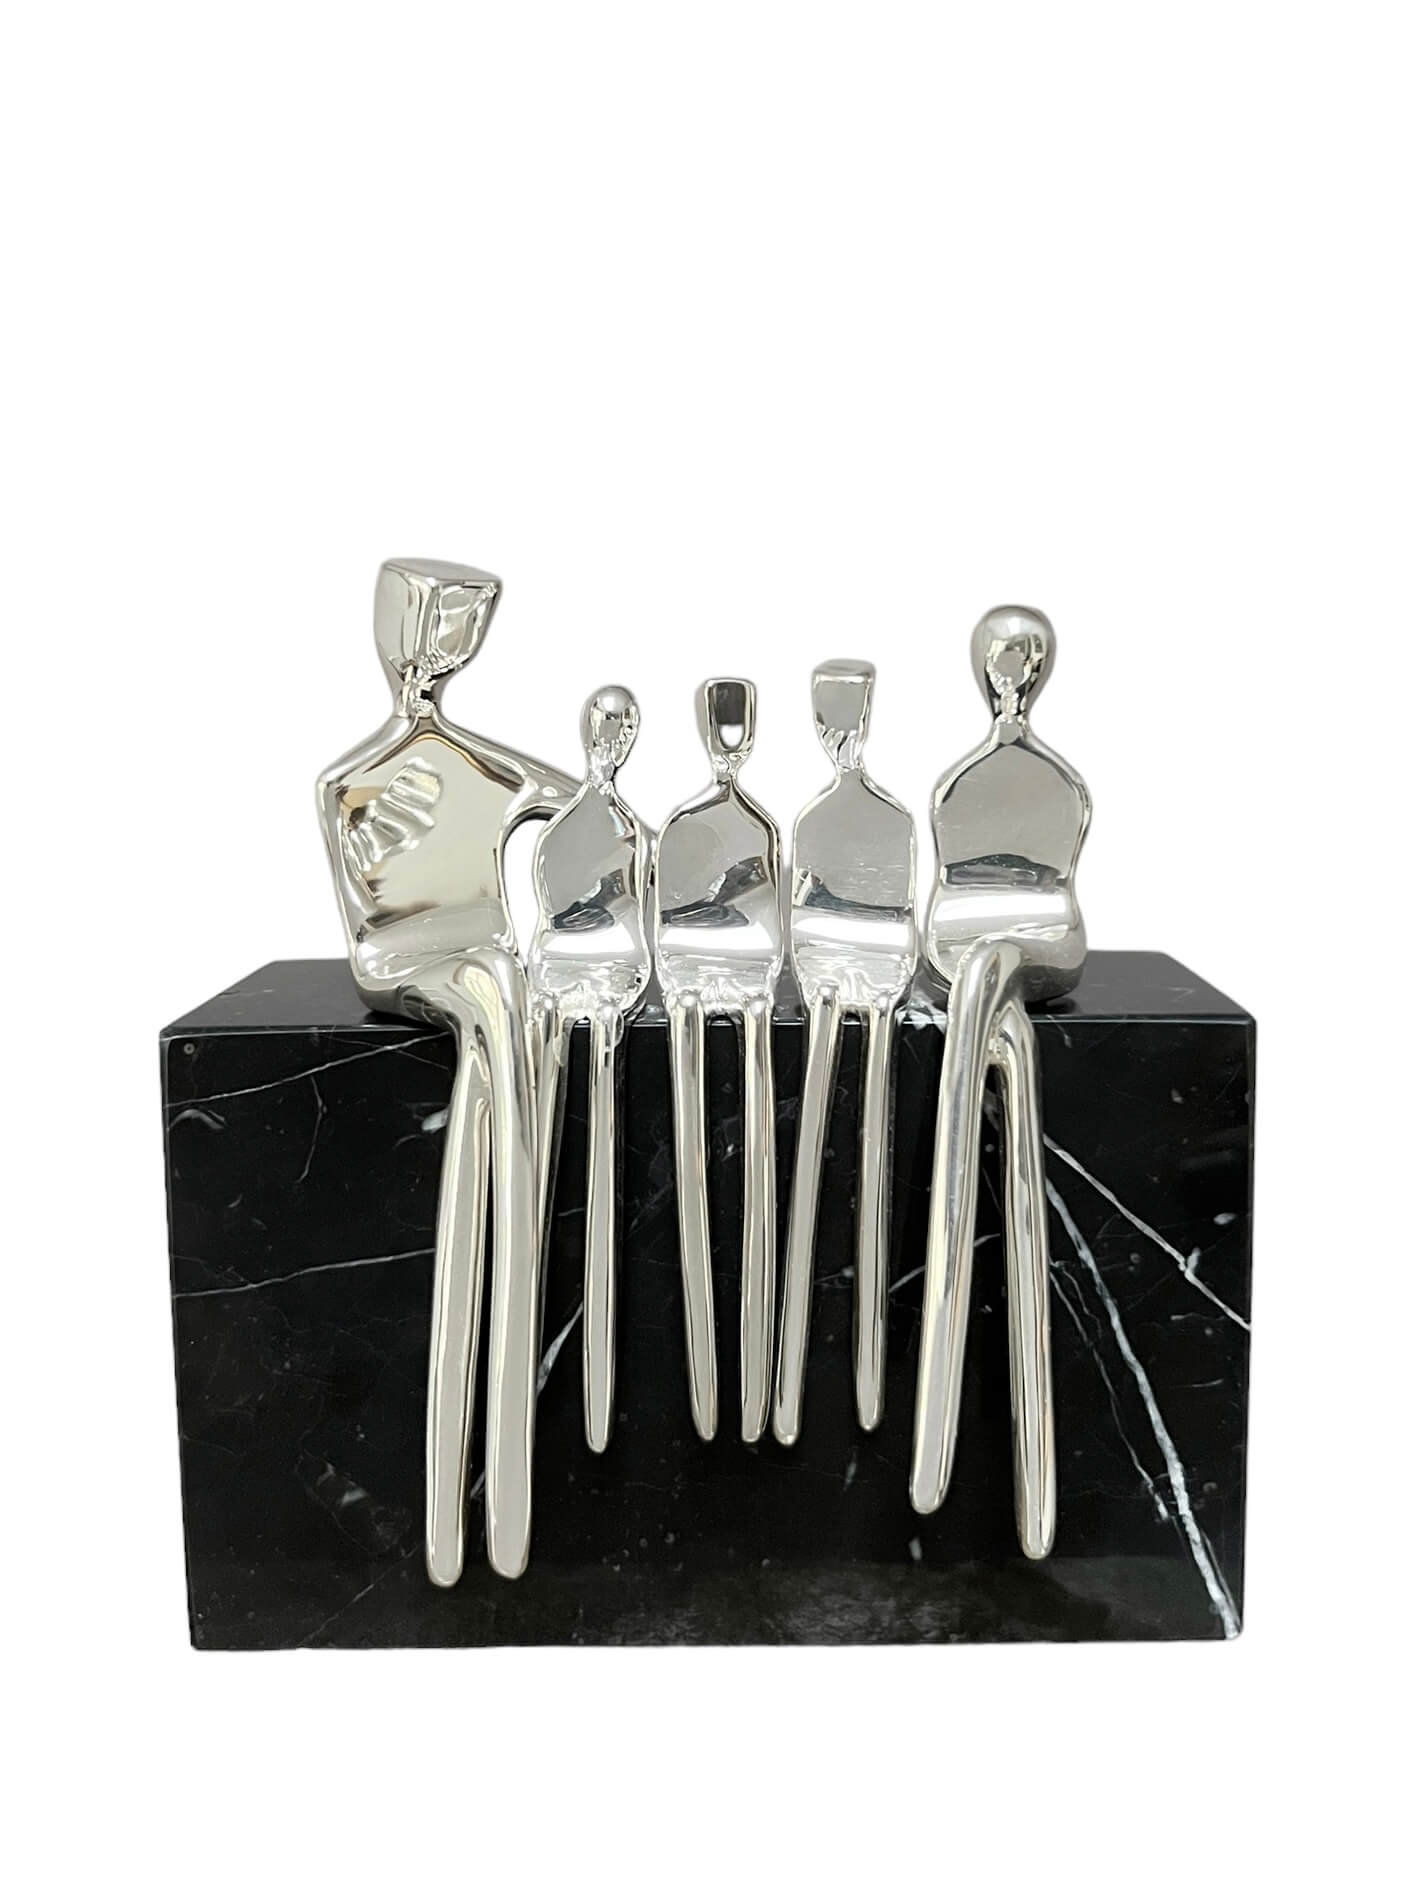 Bespoke silver family sculpture by Yenny Cocq